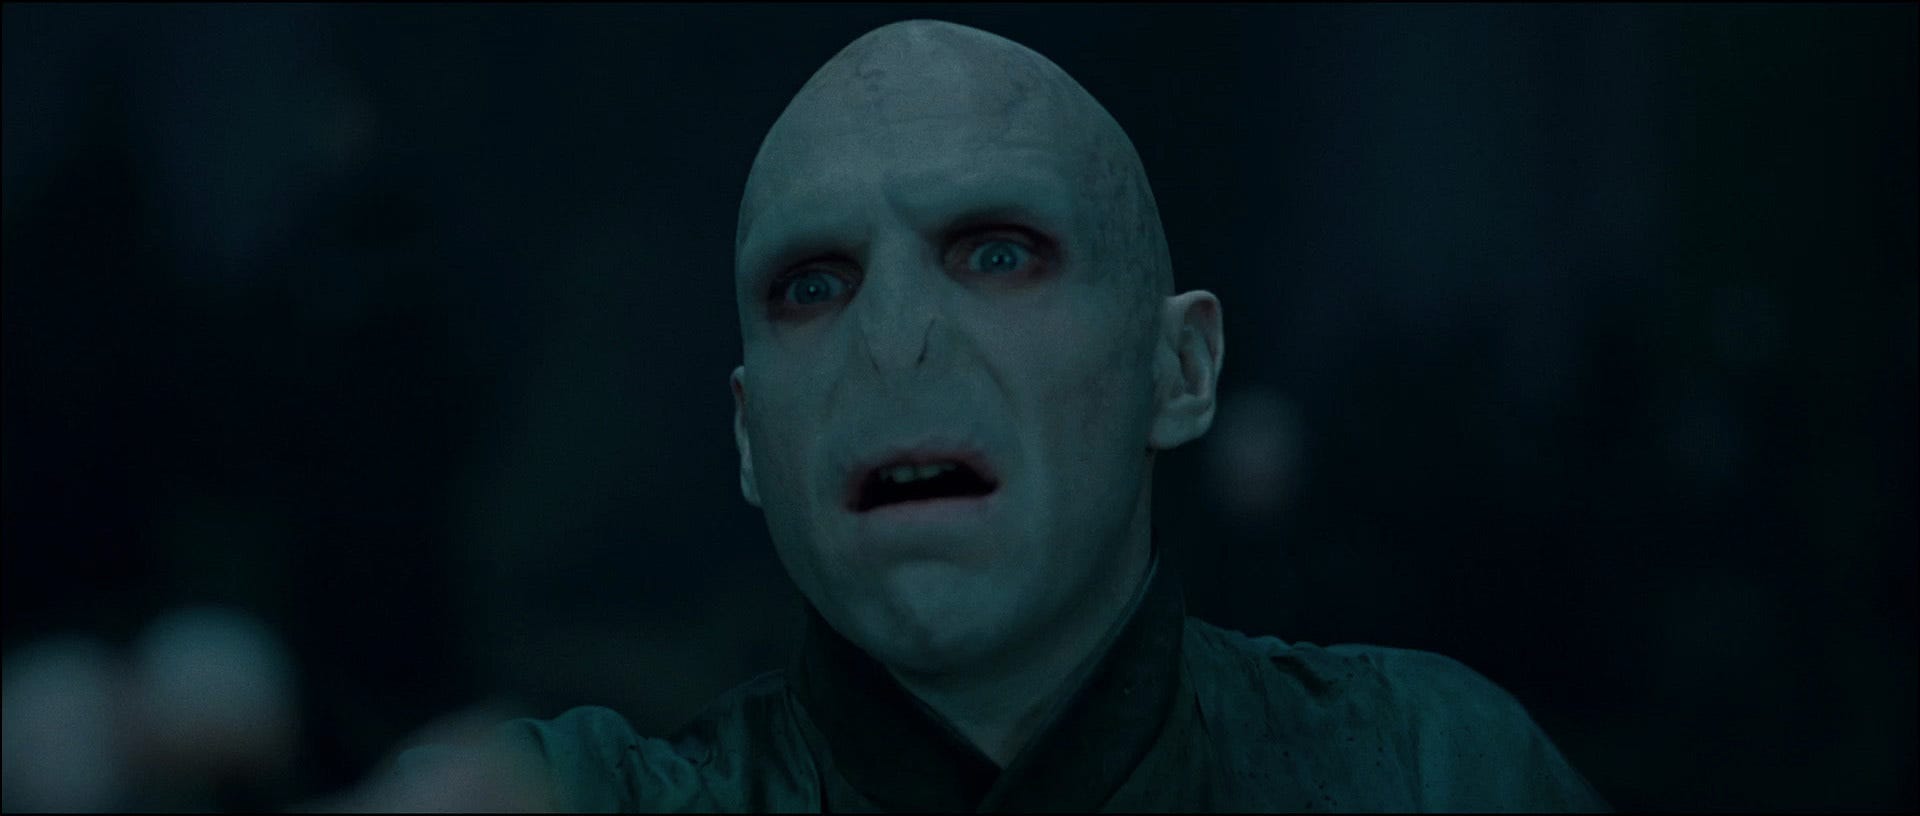 Childhood and Harry Potter: Voldemort's Perspective | Random Thought Journal